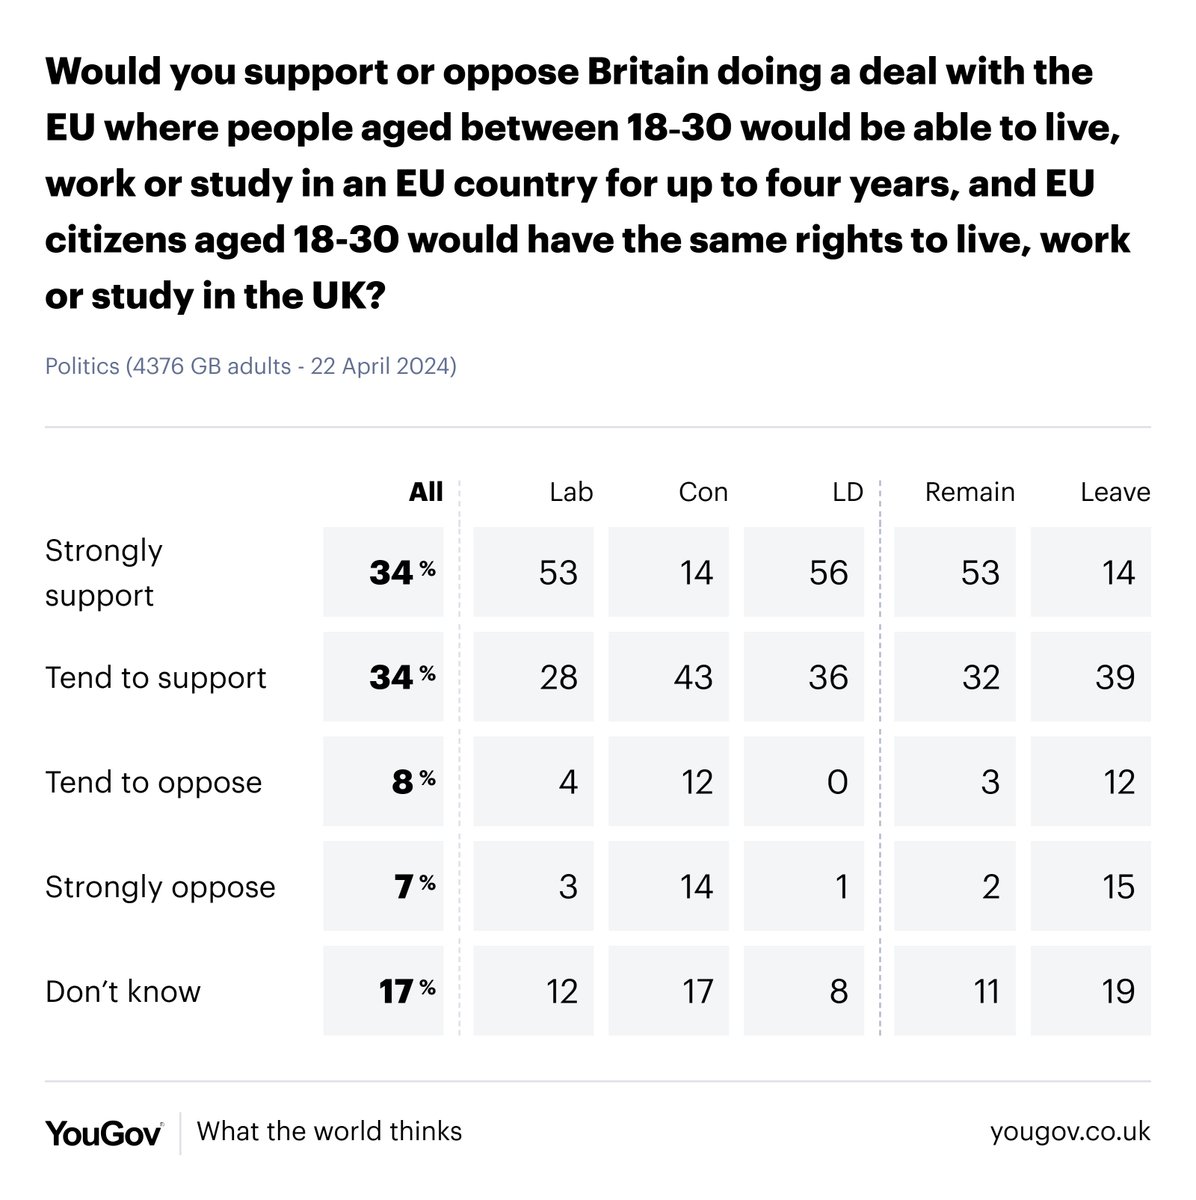 Rishi Sunak has rejected an EU proposal for young Britons to be allowed to live, work or study in the EU for up to 4 years if EU youngsters are given the same rights in the UK - but 68% of Britons would support this move, including 53% of Leave voters yougov.co.uk/topics/politic…